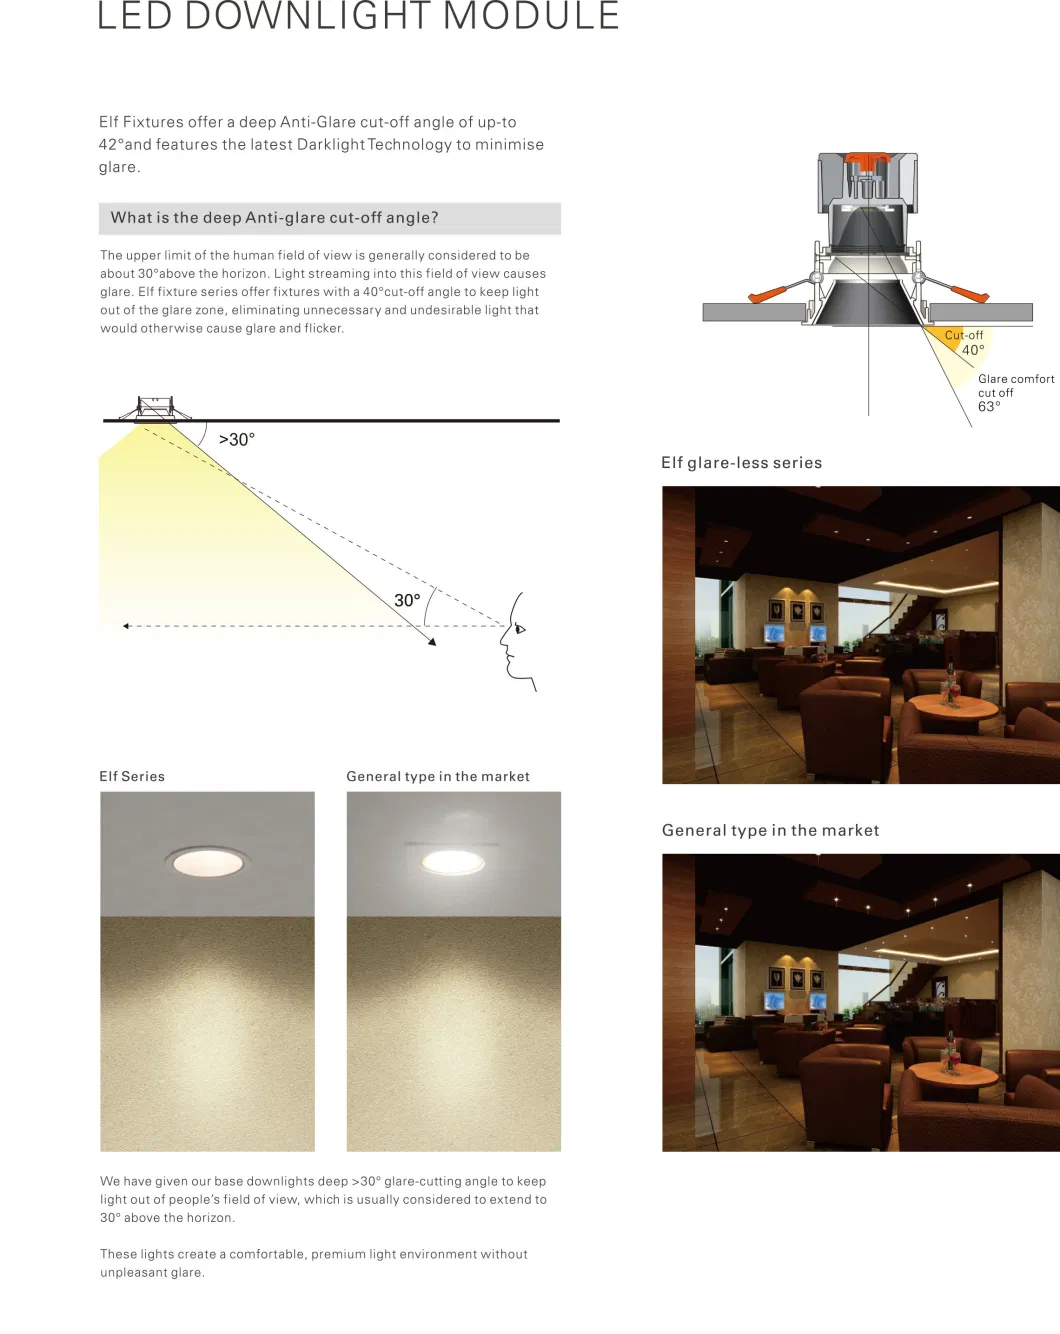 High Quality LED Downlight Module GU10 Fixture for Hotel